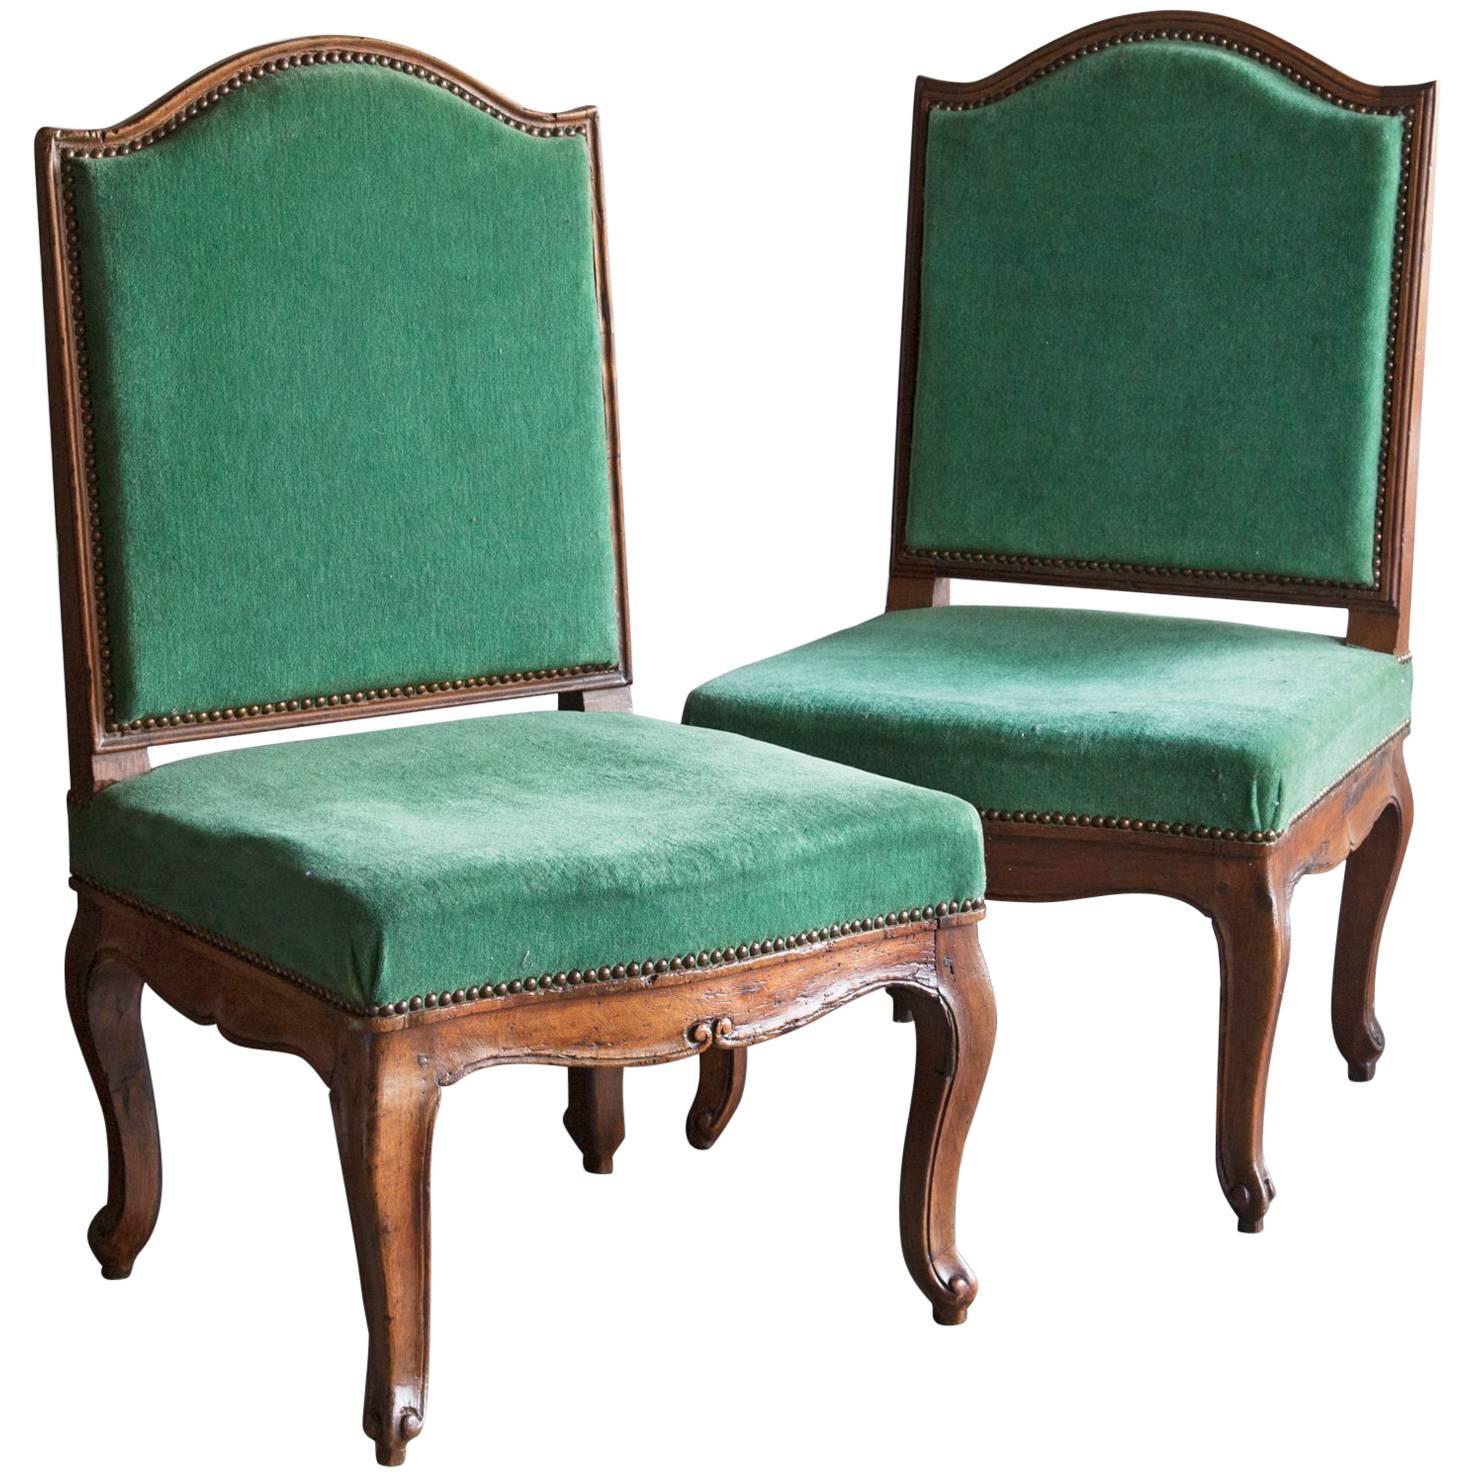 Pair of Louis XV Walnut Chairs with Shaped Backs, France, circa 1750